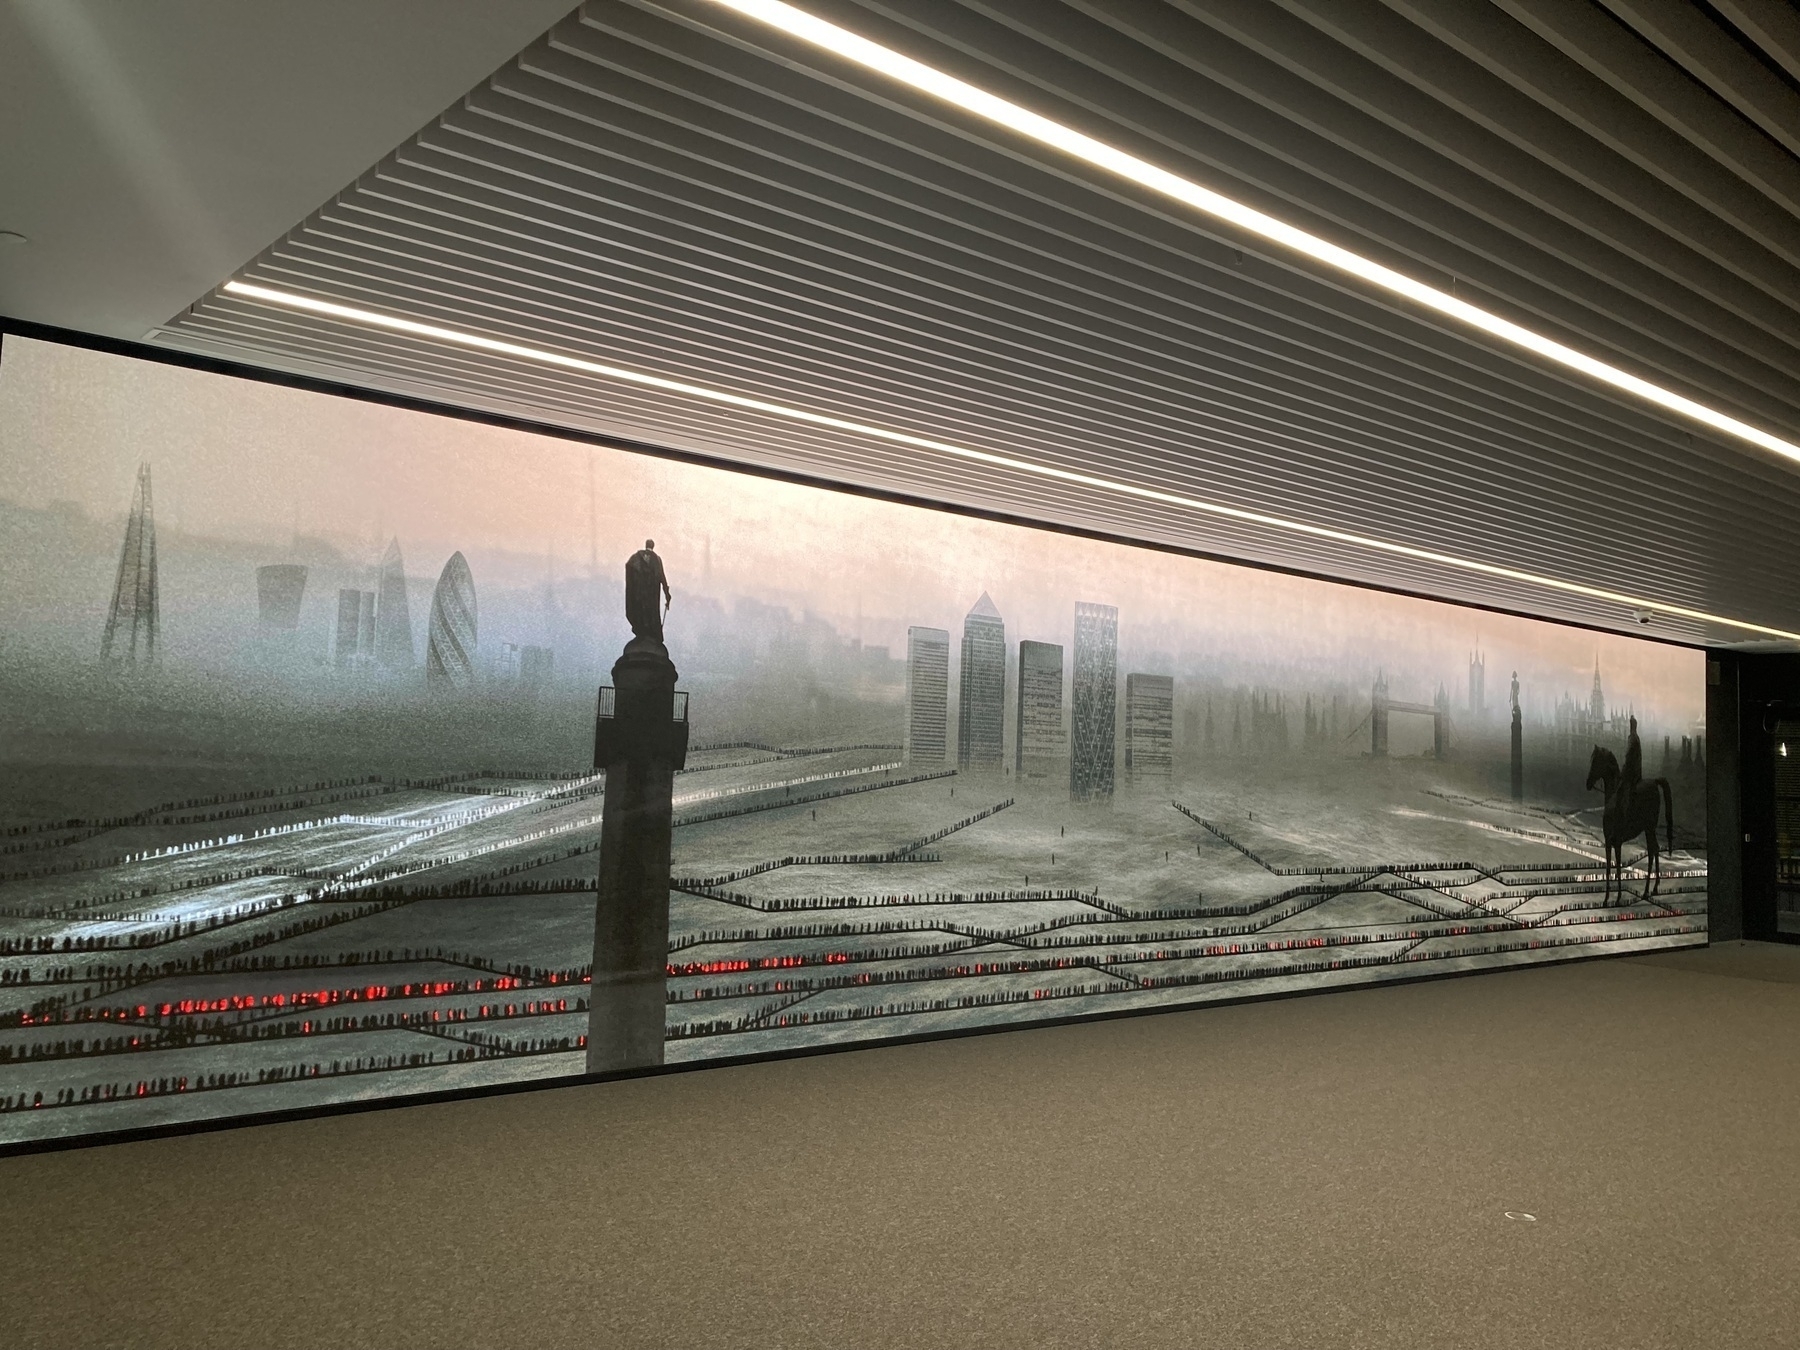 Photo of a screen-based art exhibit at Crossrail Place, London that shows a dramatic, imaginary Londonscape with moving figures above and below ground